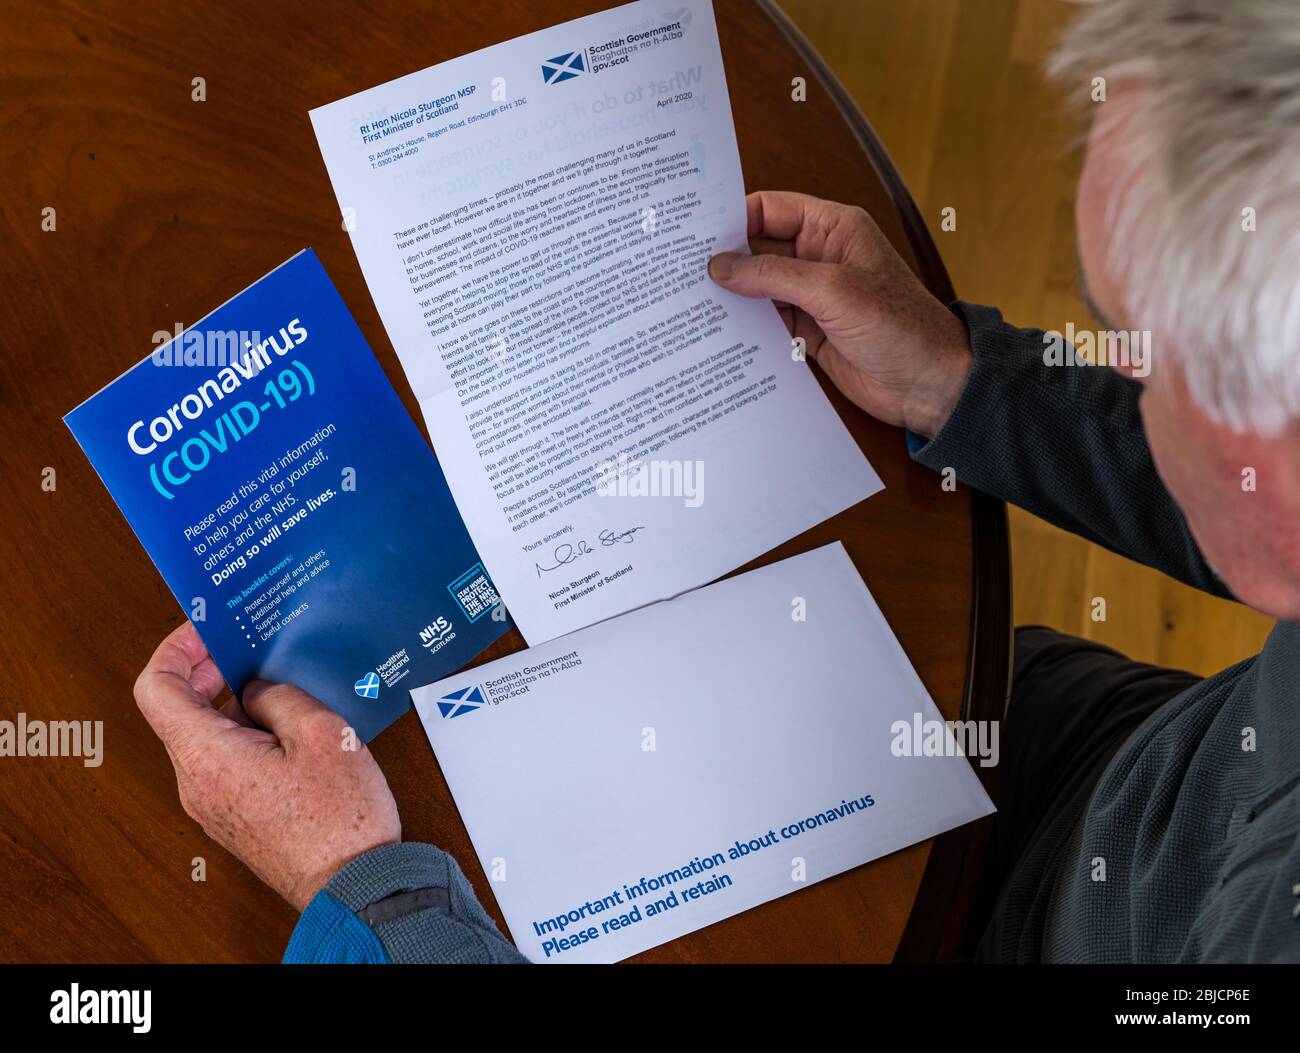 Scotland, United Kingdom. 29th April 2020. Coronavirus letter from First Minister Nicola Sturgeon, Scottish Government, and NHS information leaflet sent to all homes in the country received today A senior man reads the letter and pamphlet Stock Photo